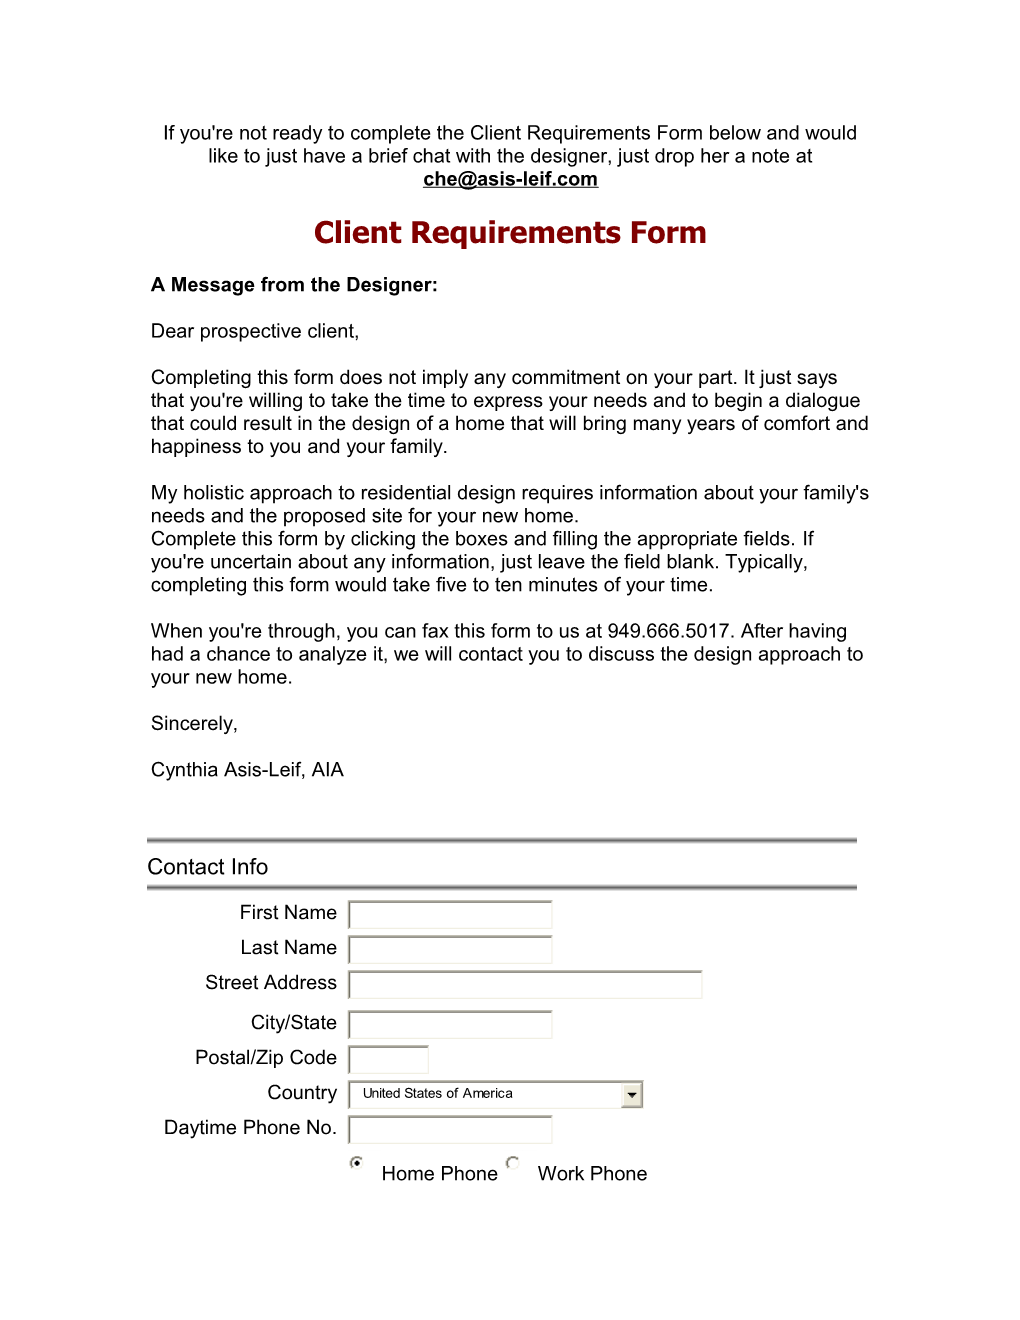 If You're Not Ready to Complete the Client Requirements Form Below and Would Like to Just